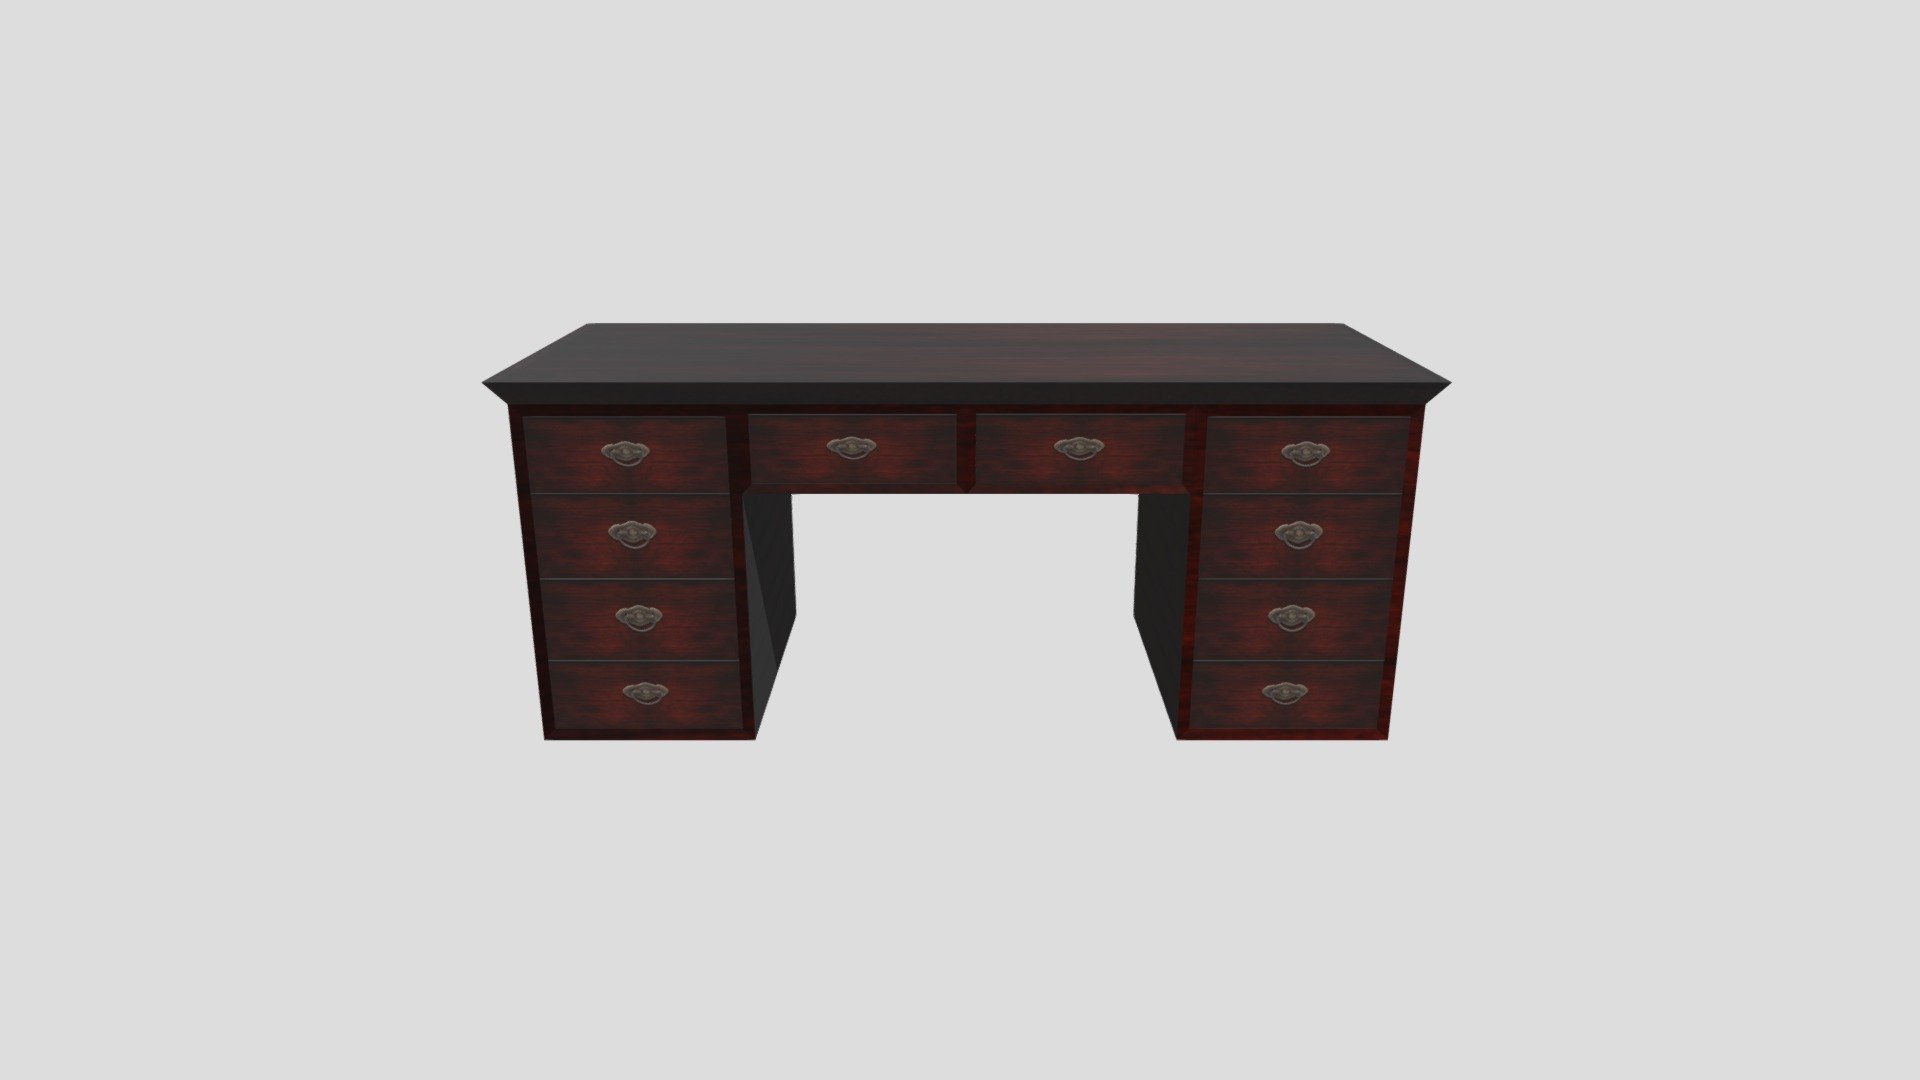 Desk for your office, study, library. Desk is made of dark cherry wood with gold ornate handles.

If you like it - please remember to click that LIKE button. TY - Desk with Drawers - Dark Cherry Wood - Download Free 3D model by EvieMarie (@yvonne.debandi) 3d model